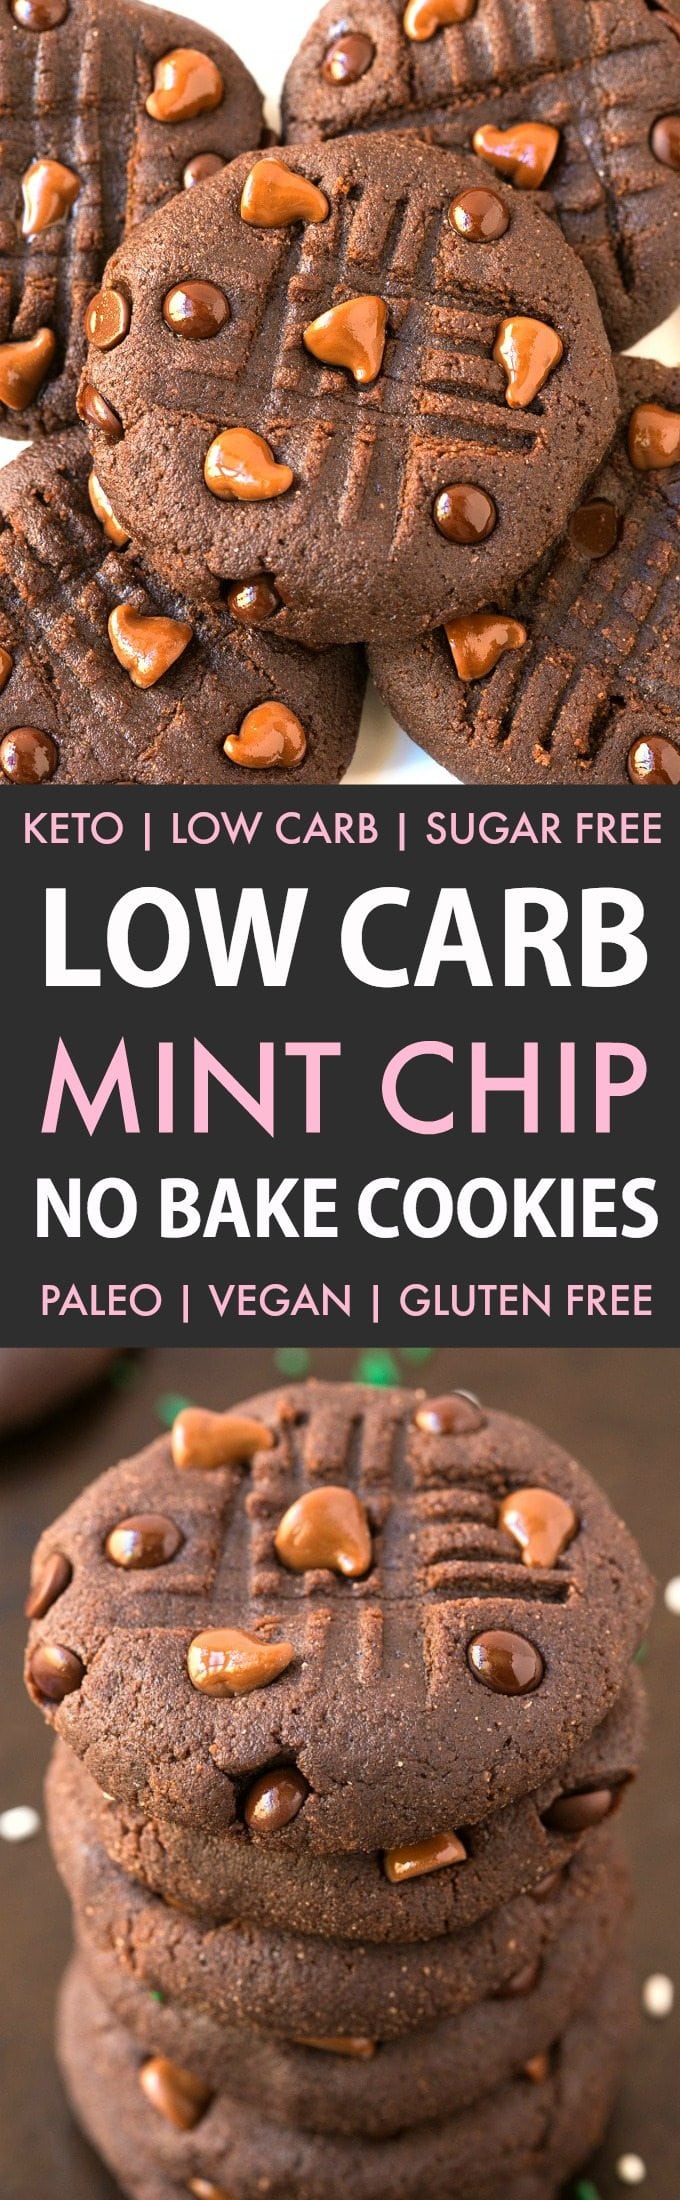 No Bake Low Carb Mint Chocolate Chip Cookies (Keto, Sugar Free, Paleo, Vegan, Gluten Free)- Thick, chewy, soft protein-packed no bake cookies with a hint of peppermint and loaded with chocolate! #keto #ketodessert #lowcarbrecipe #sugarfree #dairyfree | Recipe on thebigmansworld.com